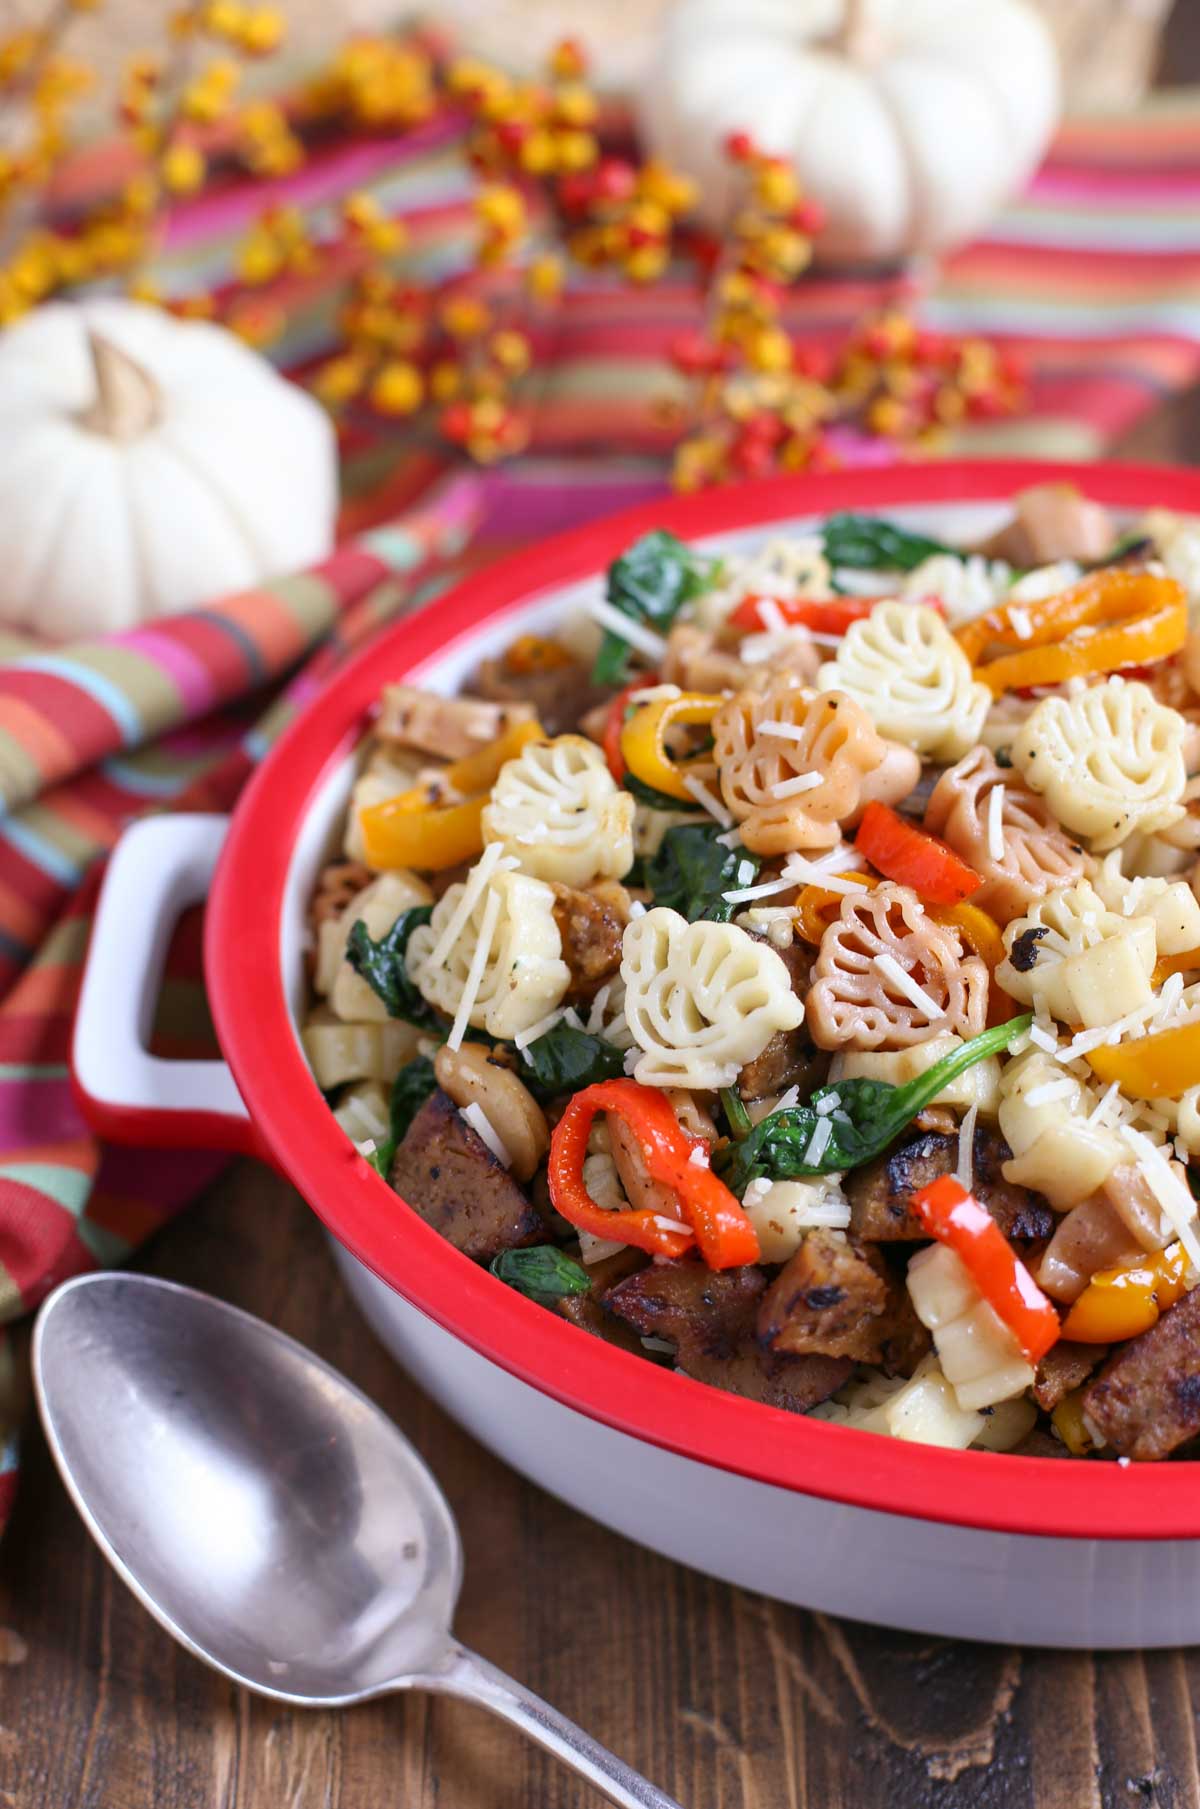 Veggie Sausage and Sweet Peppers with Turkey Pasta - a Thanksgiving Alternative! | Vegan Sausage, onions, colorful sweet peppers, fresh spinach and cannellini beans combine to make a delicious and hearty dish! | Add something new to your menu! | WorldofPastabilities.com